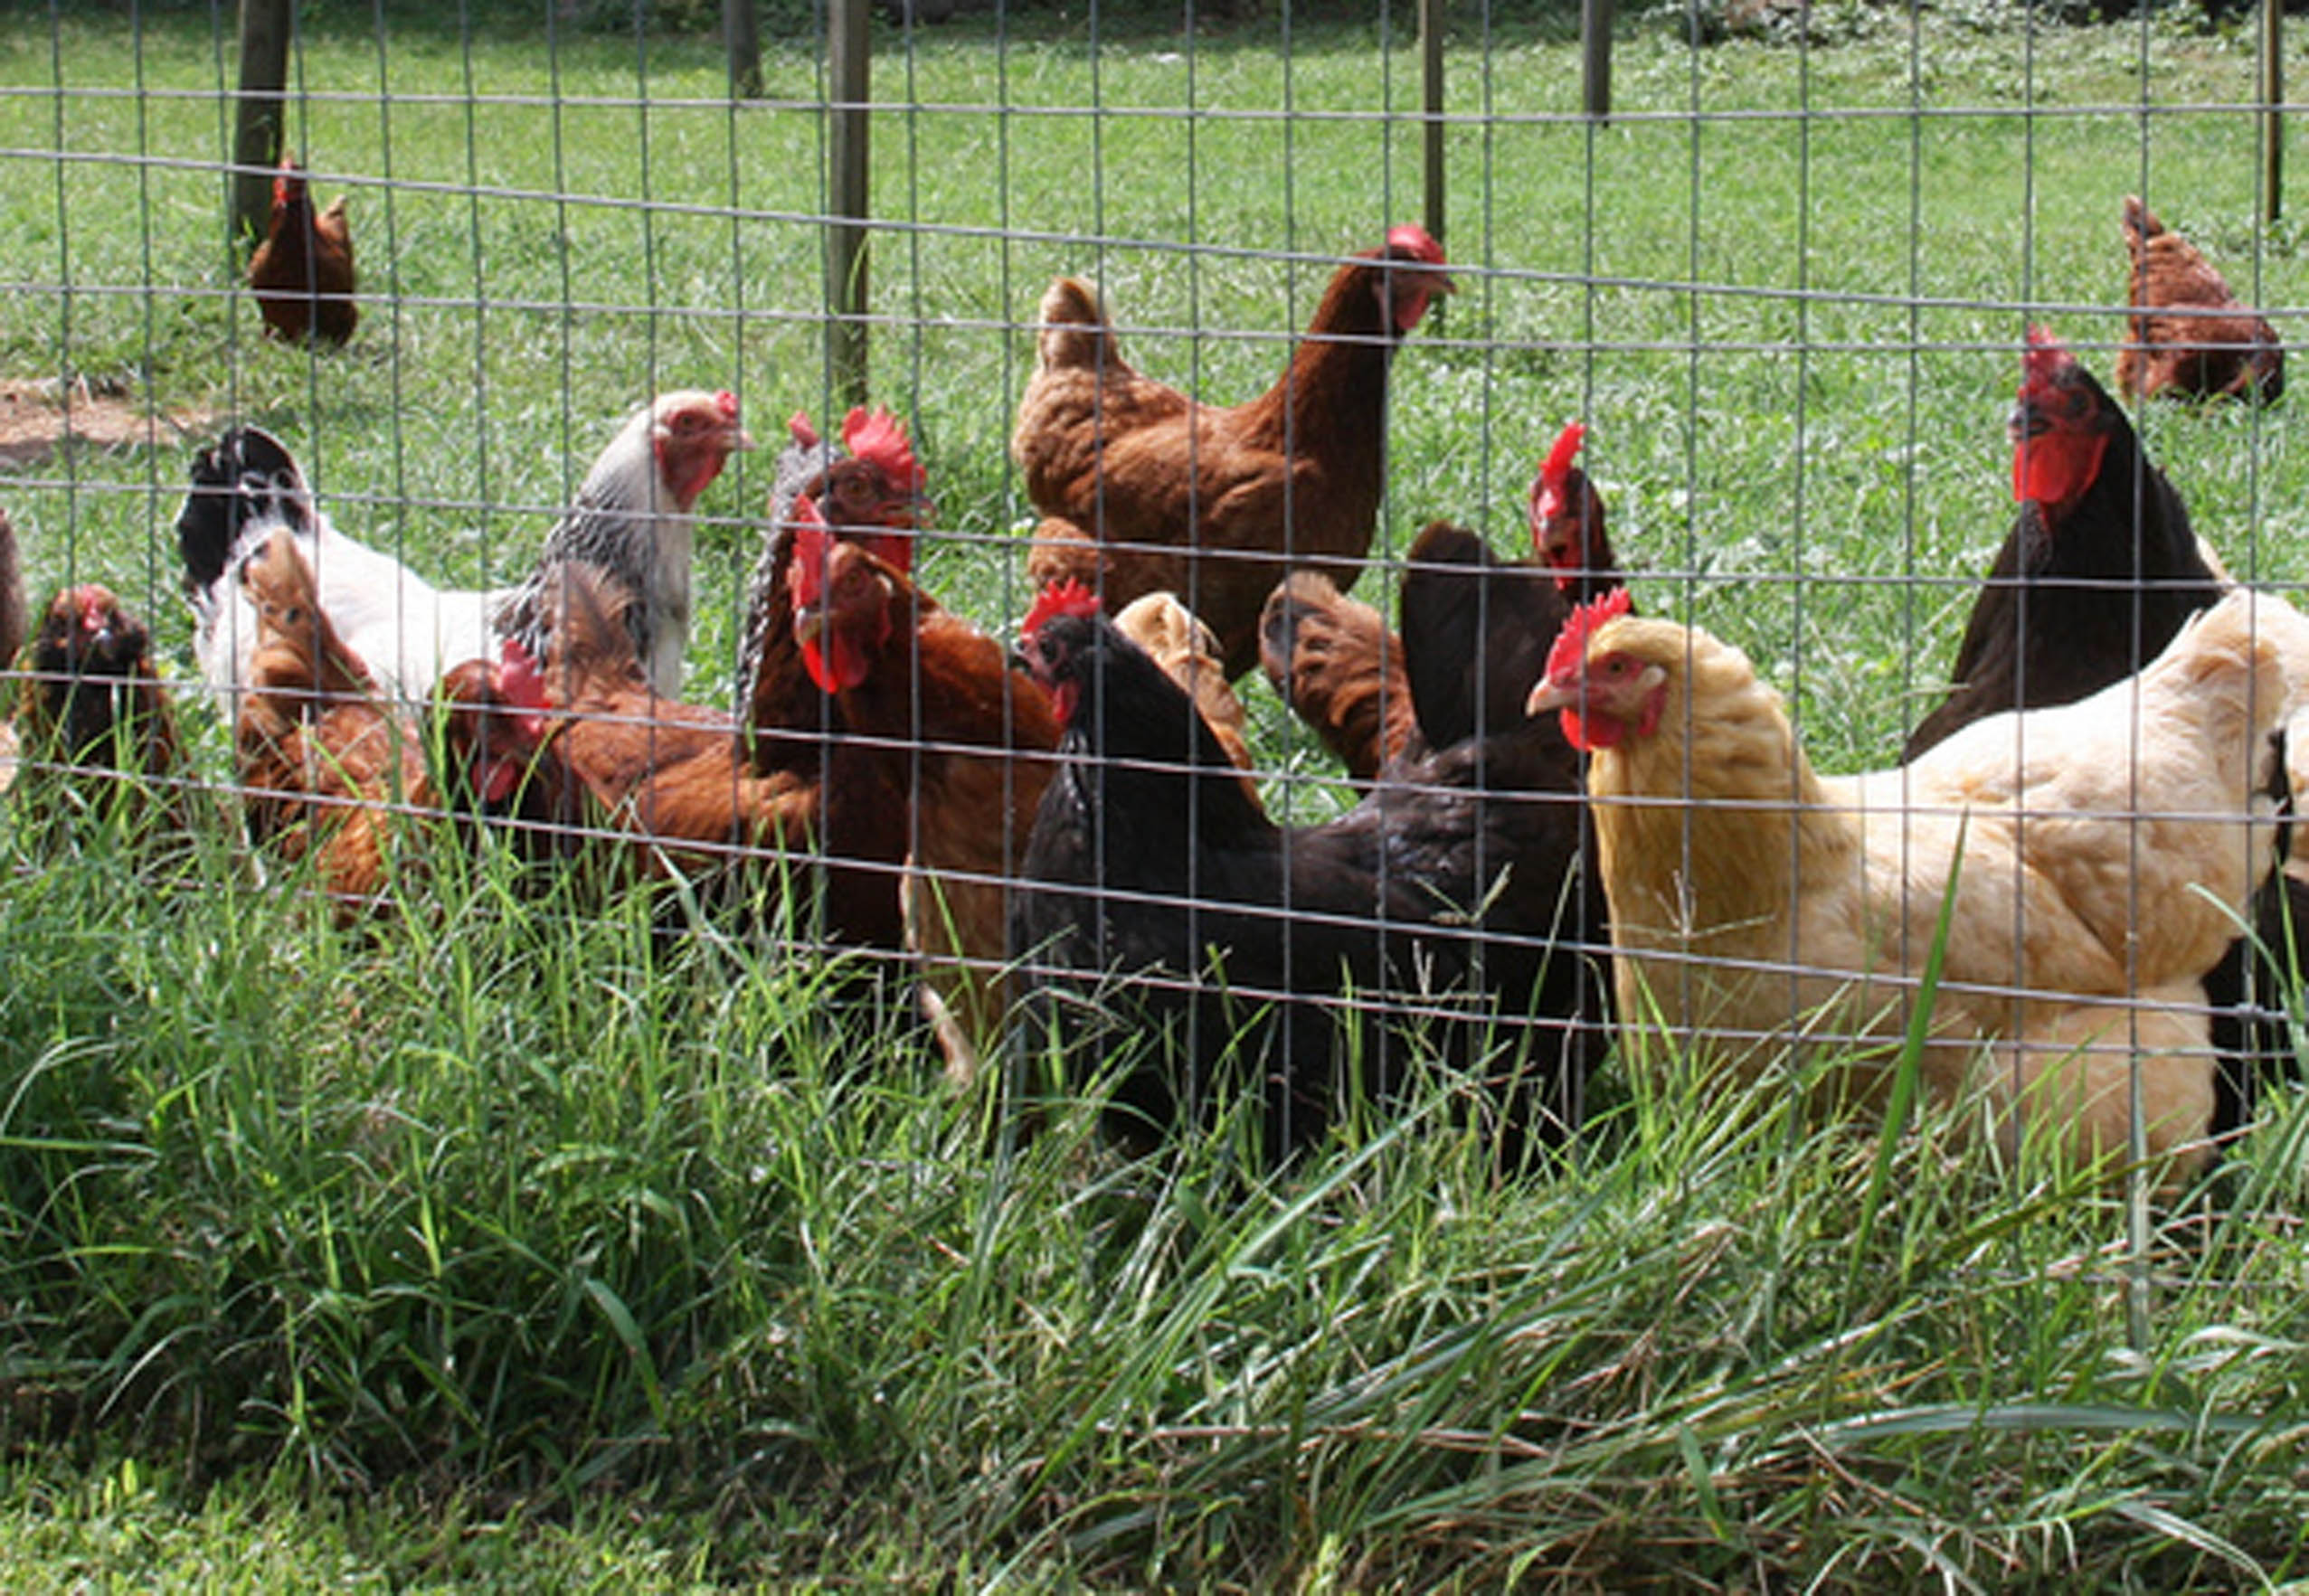 Small flocks of chicken can provide families with eggs, meat and hours of entertainment.